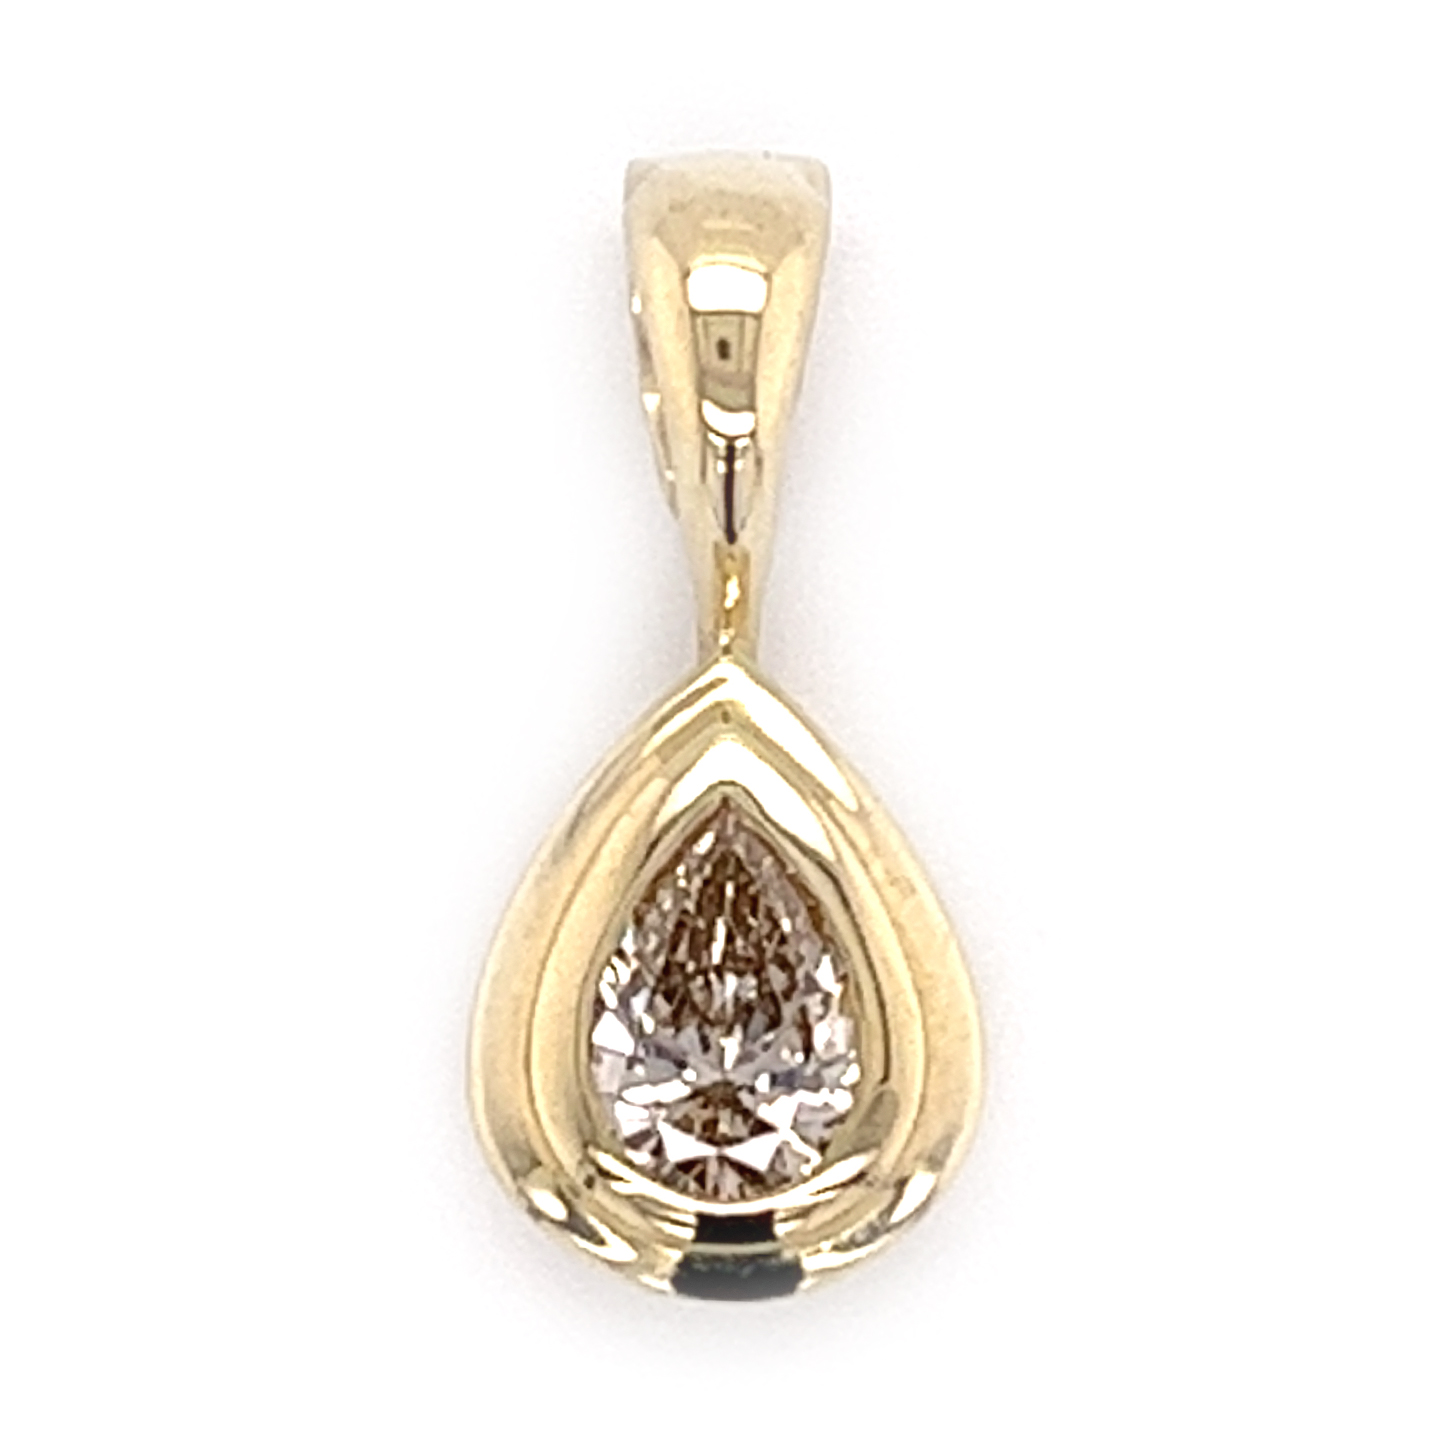 Diamant, champagner, 0,5 ct 585 Gelbgold Anhänger (Clip), Sogni d´oro | 37863